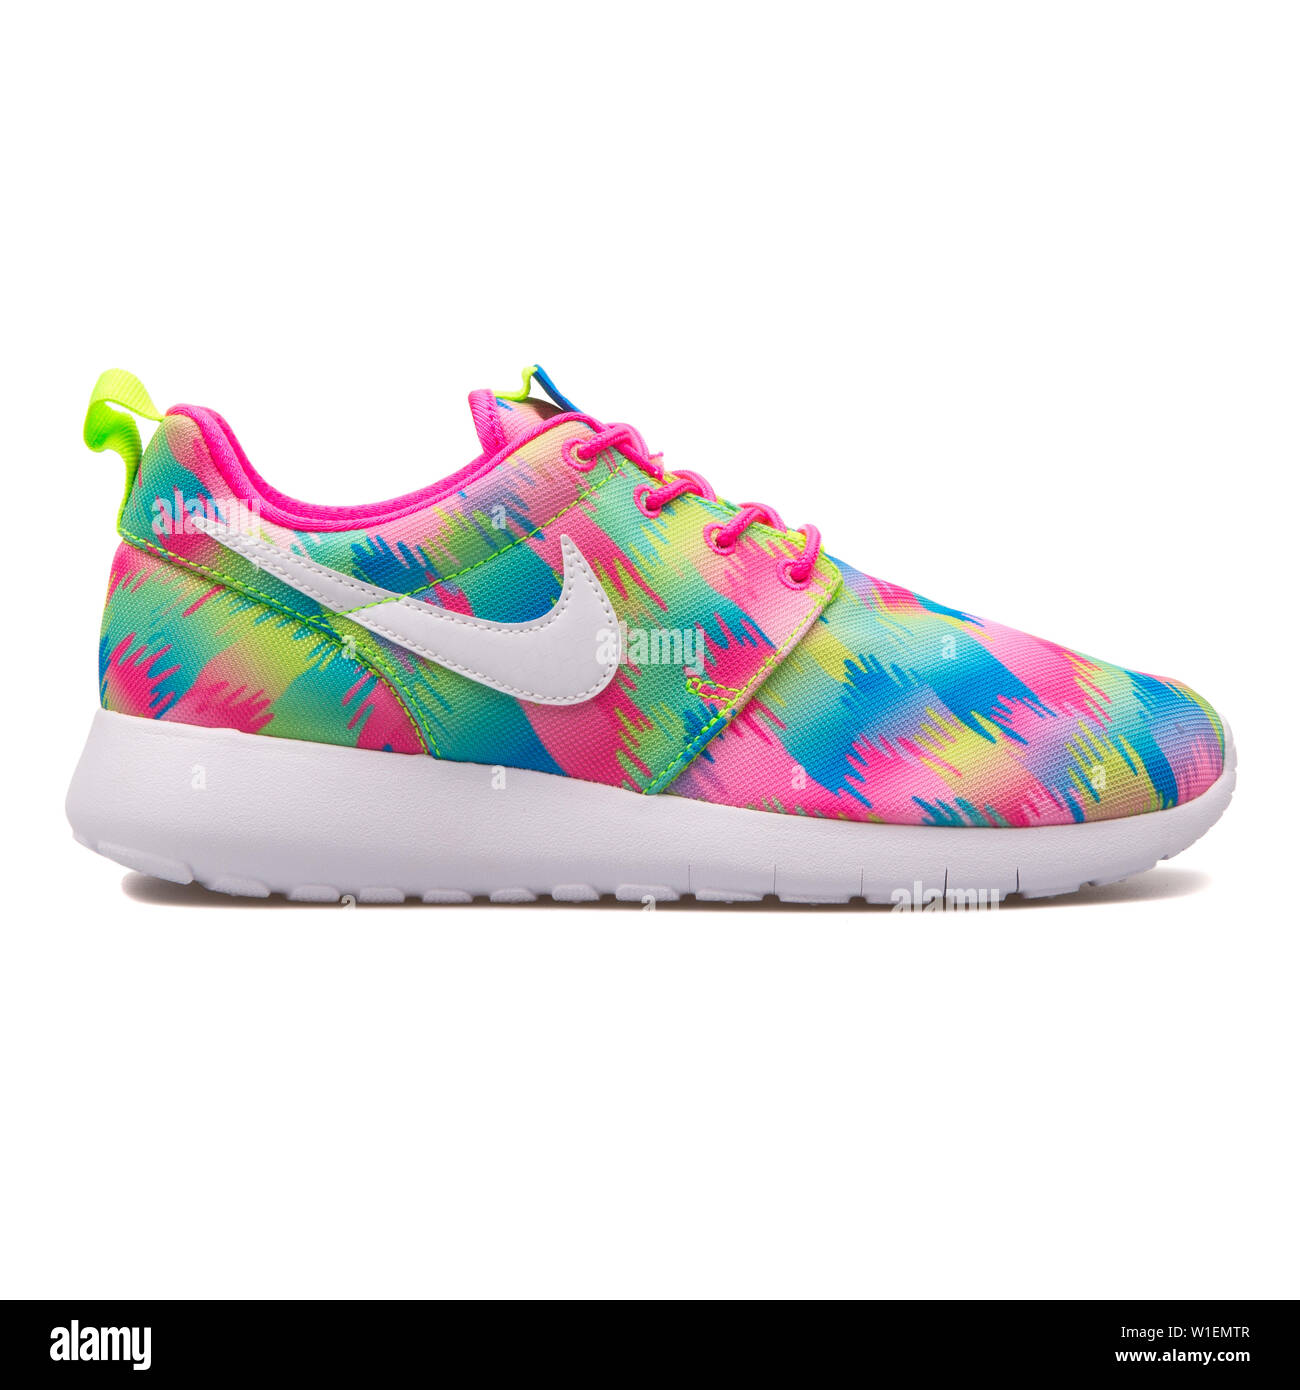 VIENNA, AUSTRIA - AUGUST 30, 2017: Nike Roshe One Print pink, blue, green  and yellow sneaker on white background Stock Photo - Alamy